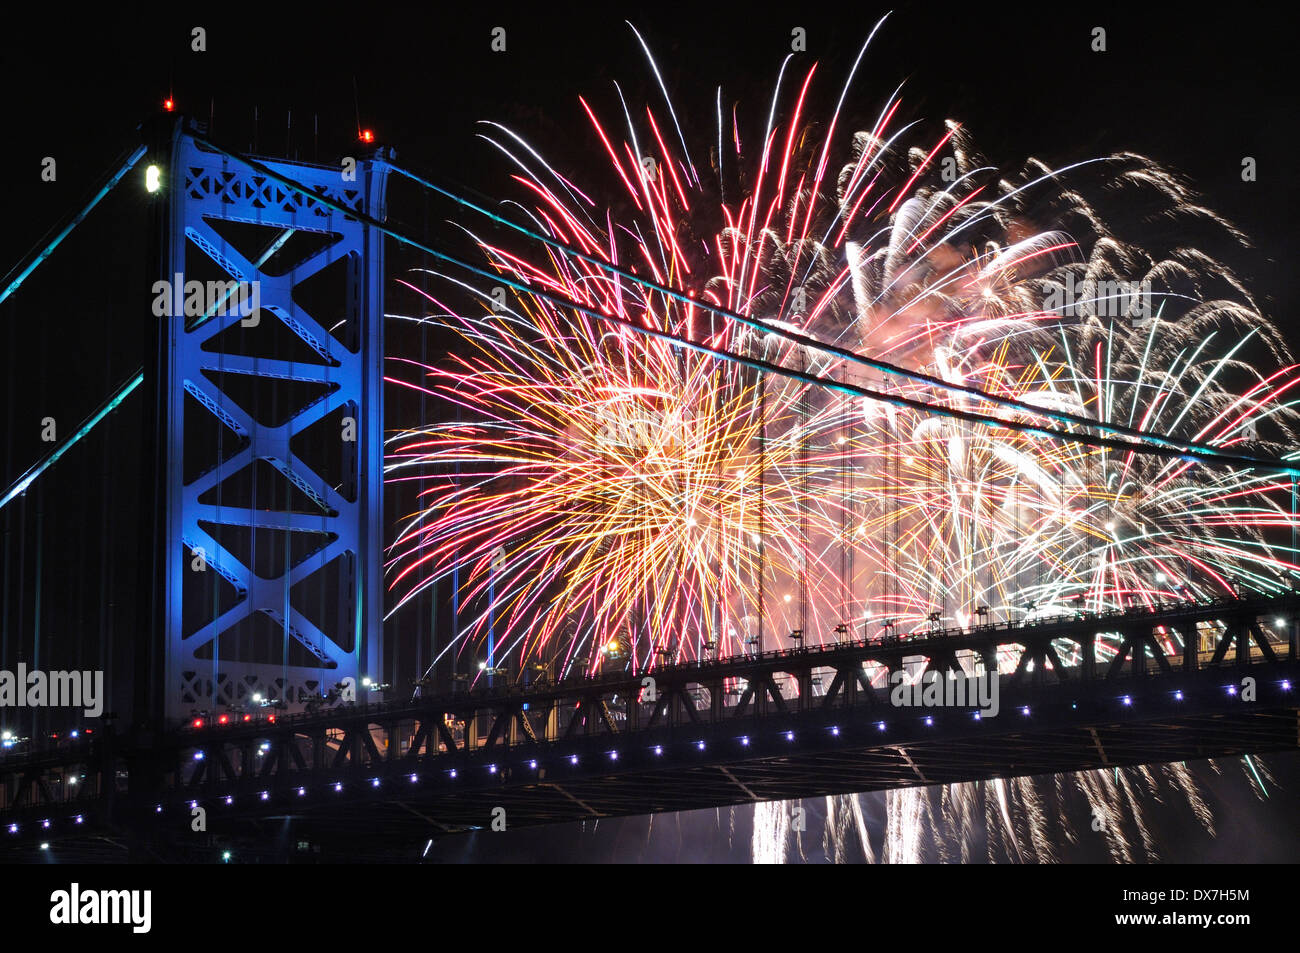 Fireworks over the Ben Franklin Bridge and the Delaware River between